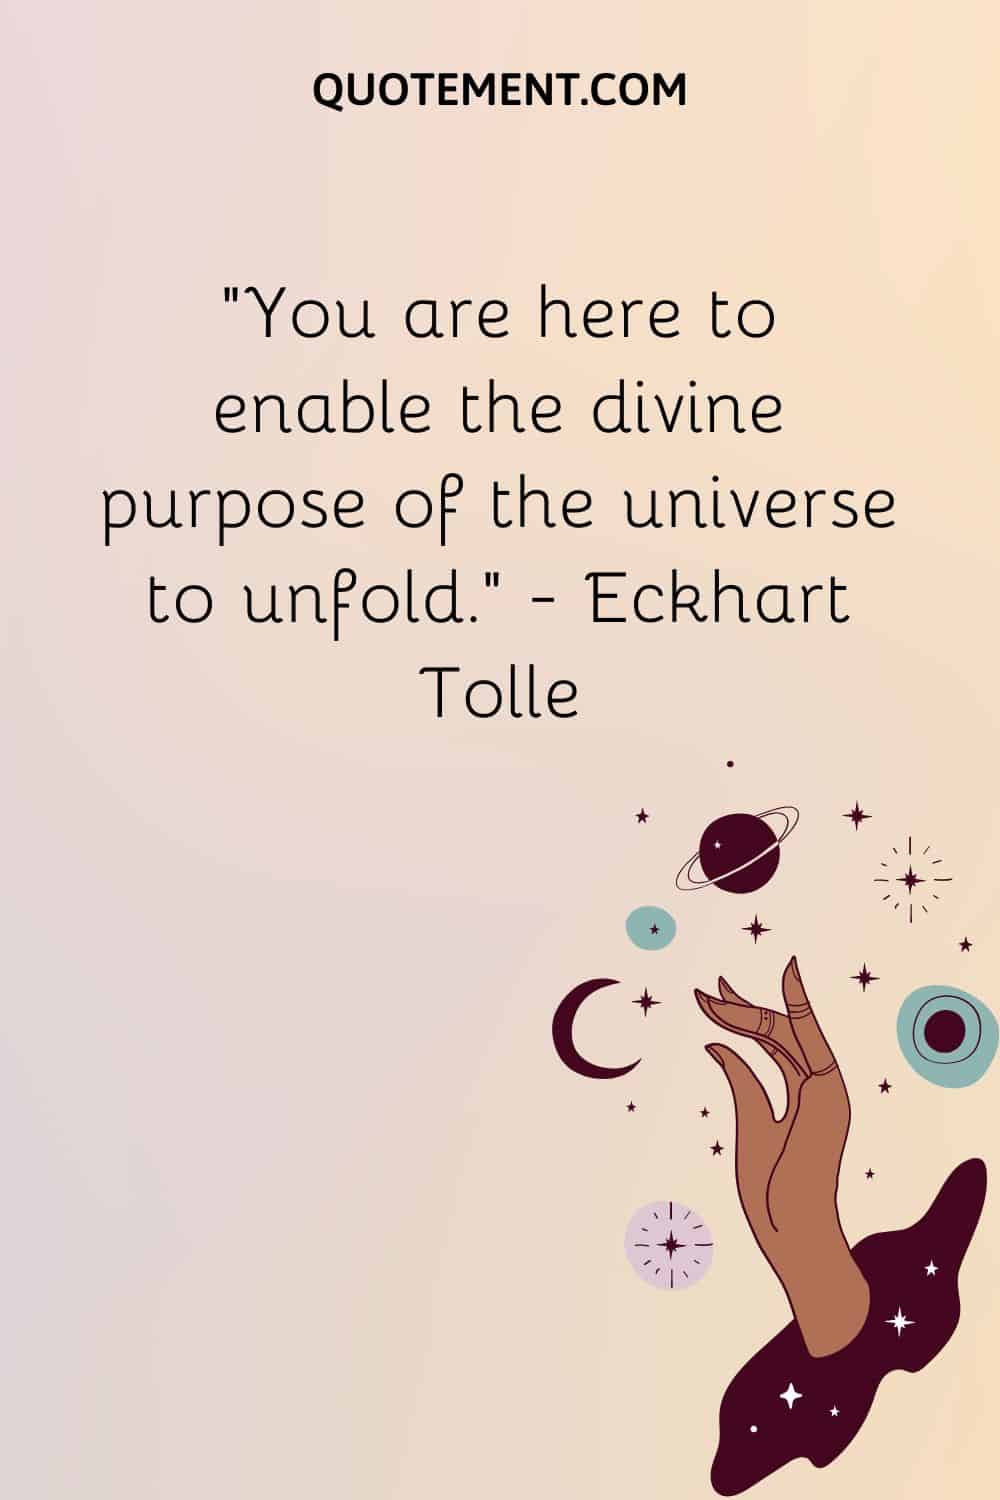 You are here to enable the divine purpose of the universe to unfold